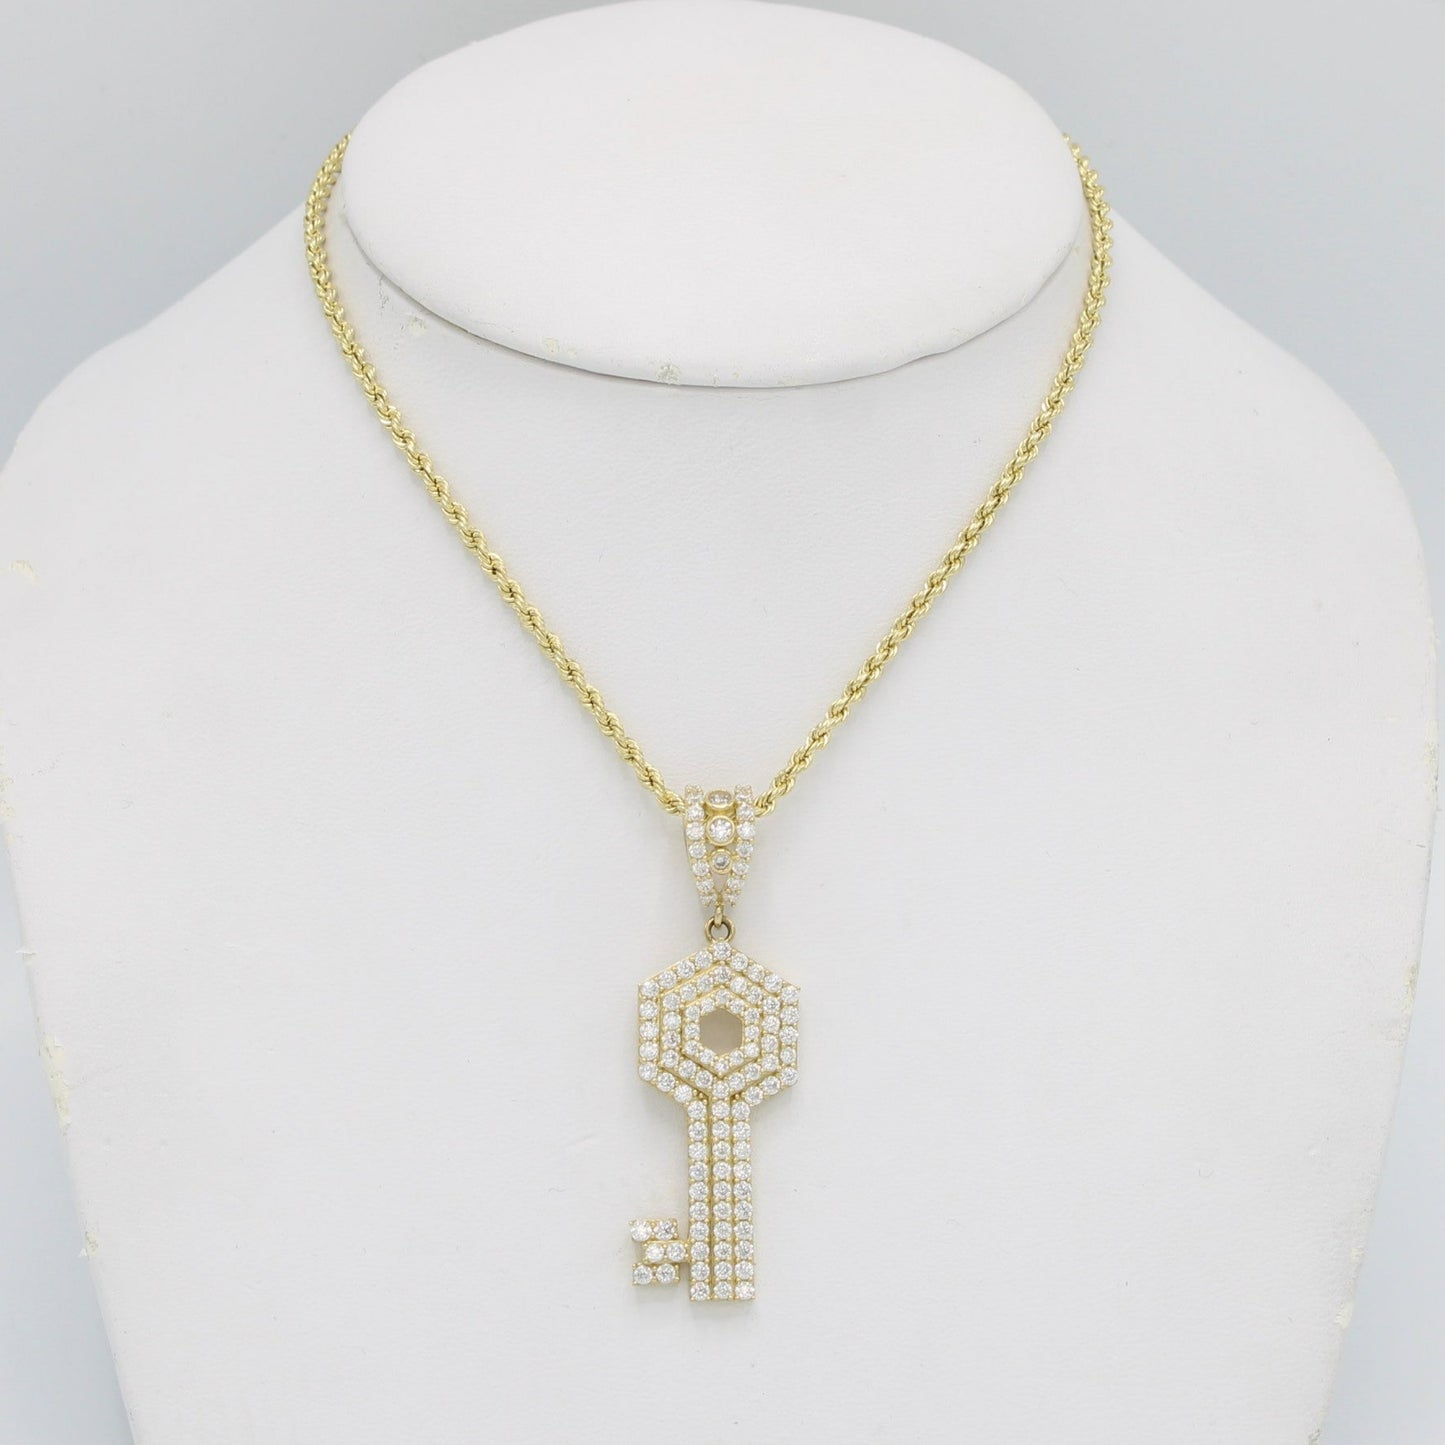 14K Set Key Pendan Cz Stones With Rope Chain And Hoops Yellow Gold